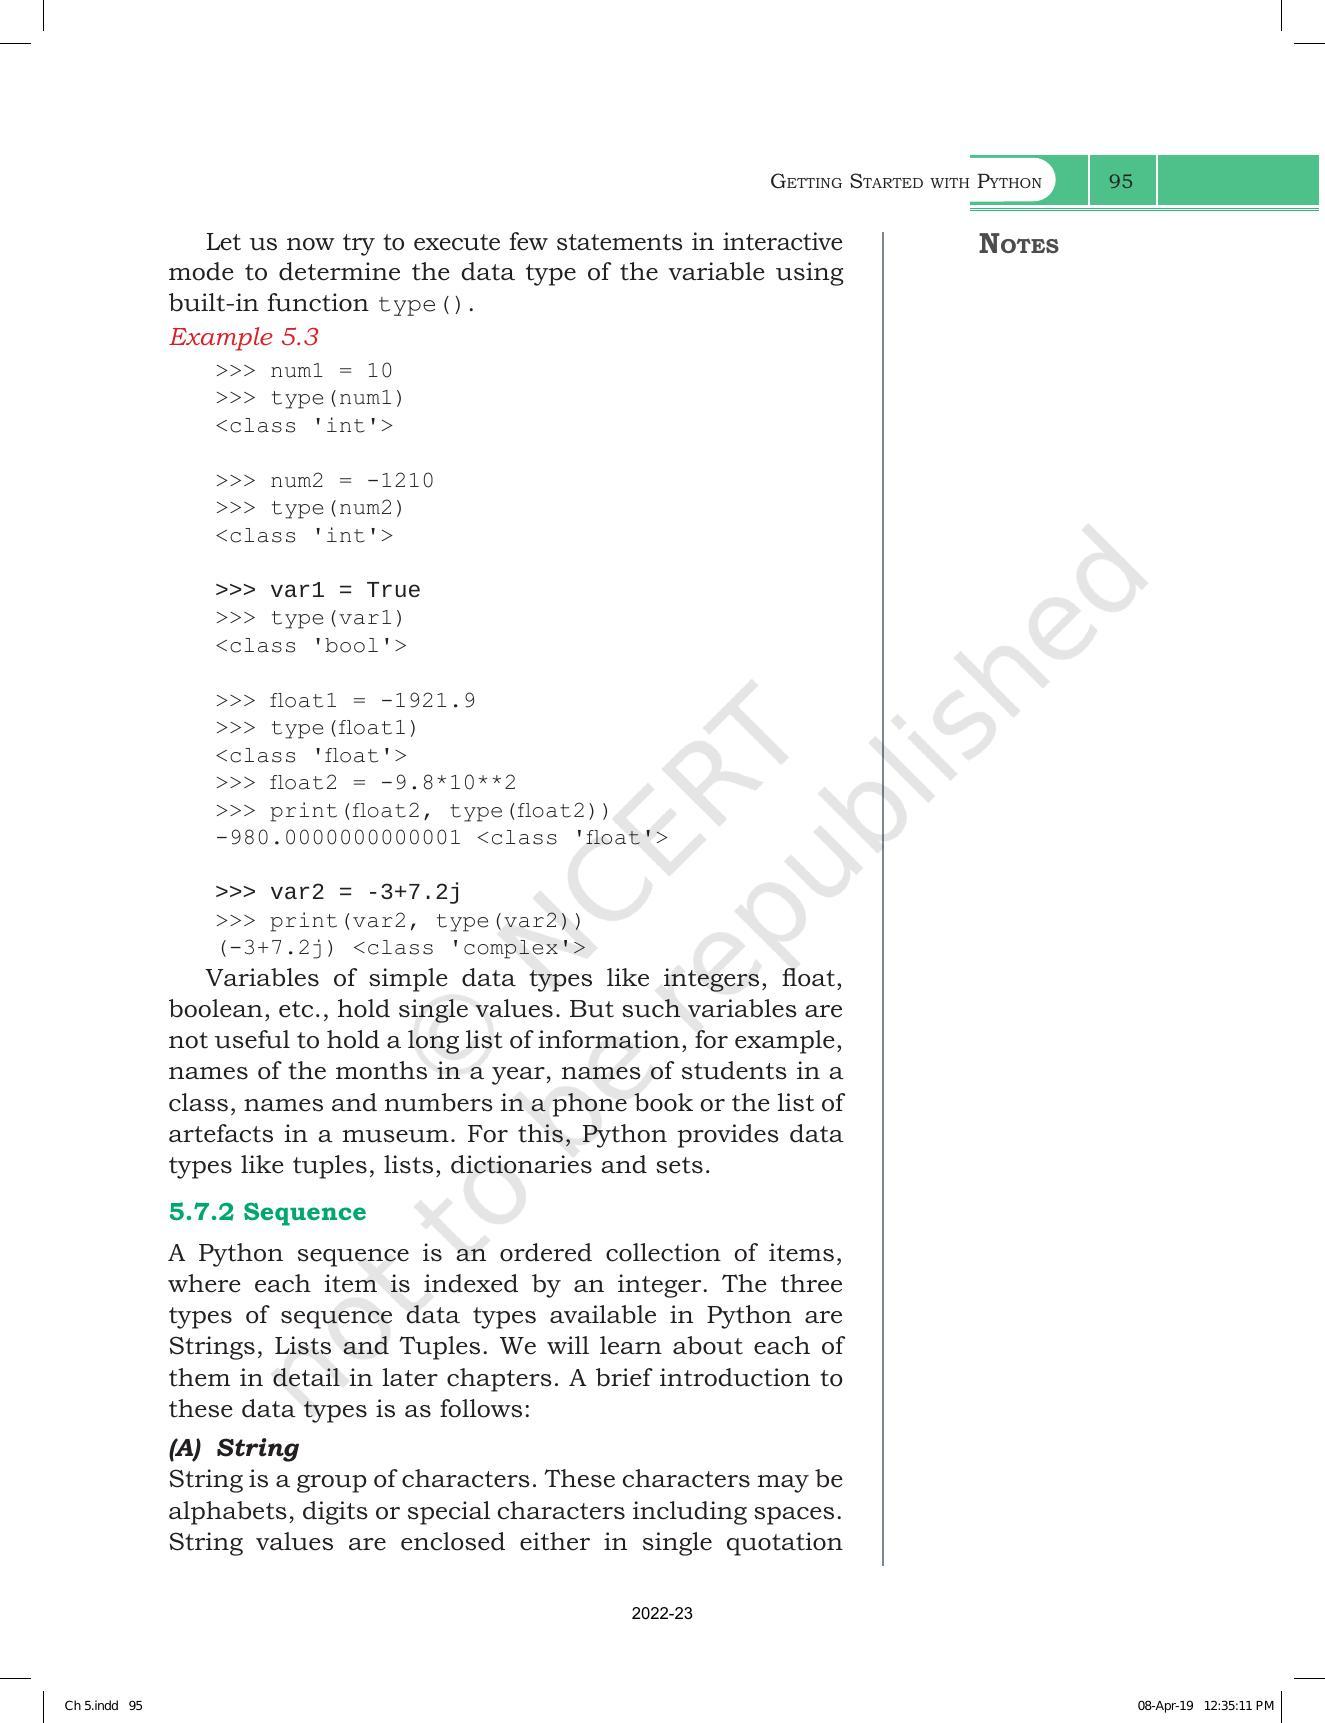 NCERT Book for Class 11 Computer Science Chapter 5 Getting Started with Python - Page 9